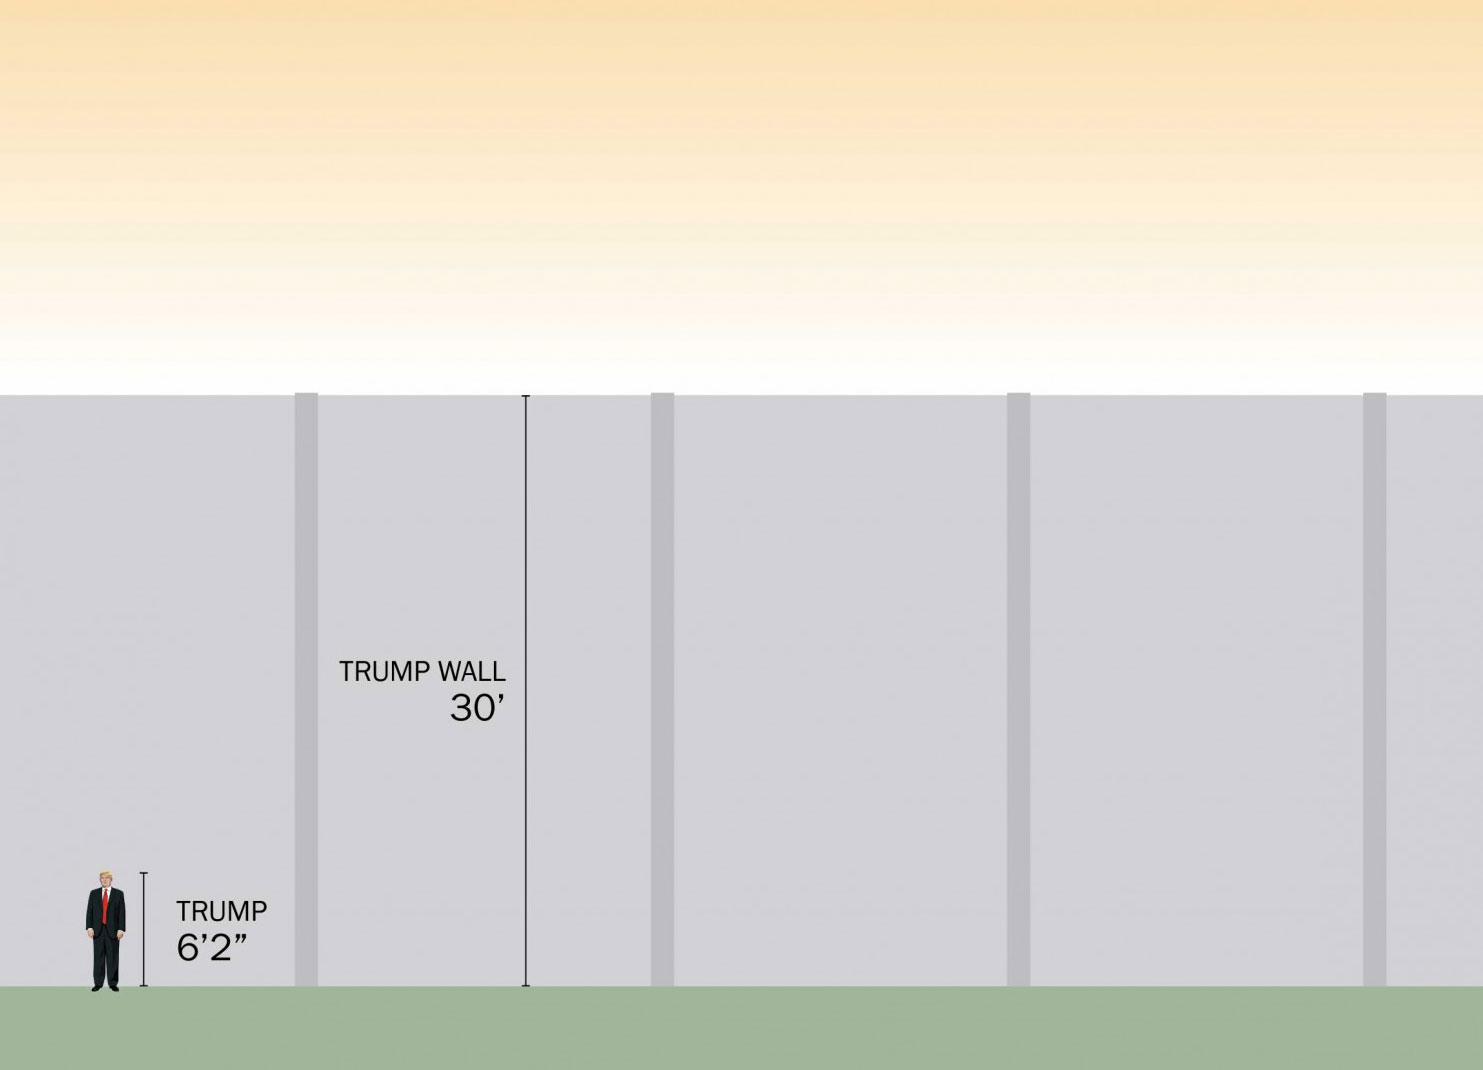 Illustration of Donald Trump's wall on the Mexican border as he described it in August 2015; the proposed height has fluctuated over time